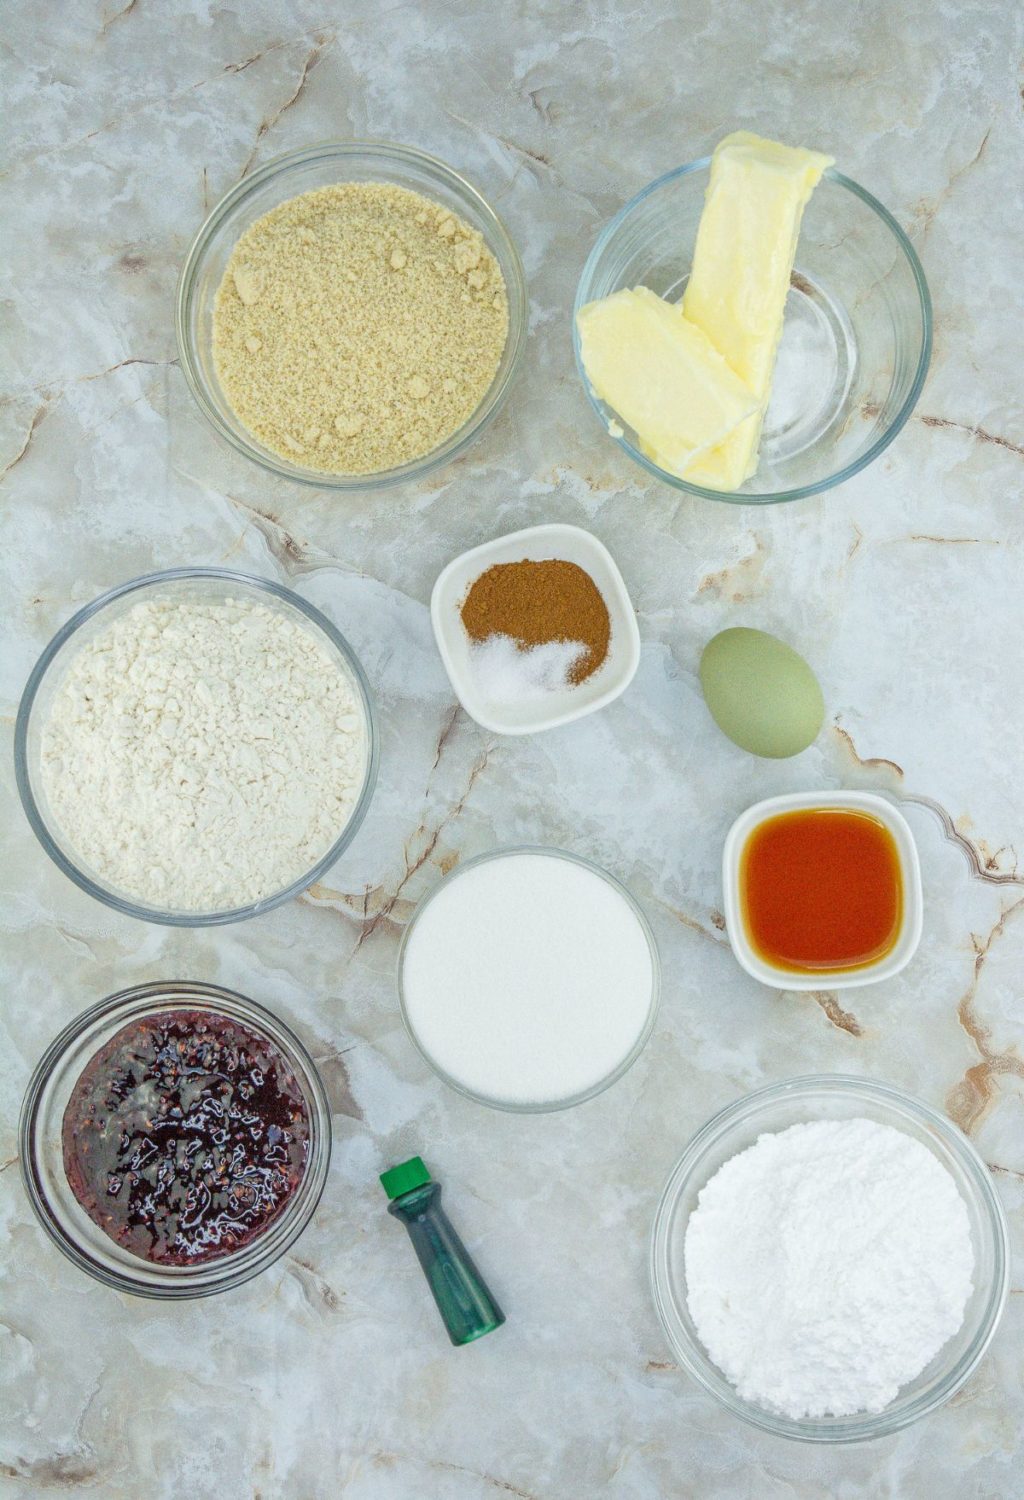 The ingredients for a cake are shown on a marble table.